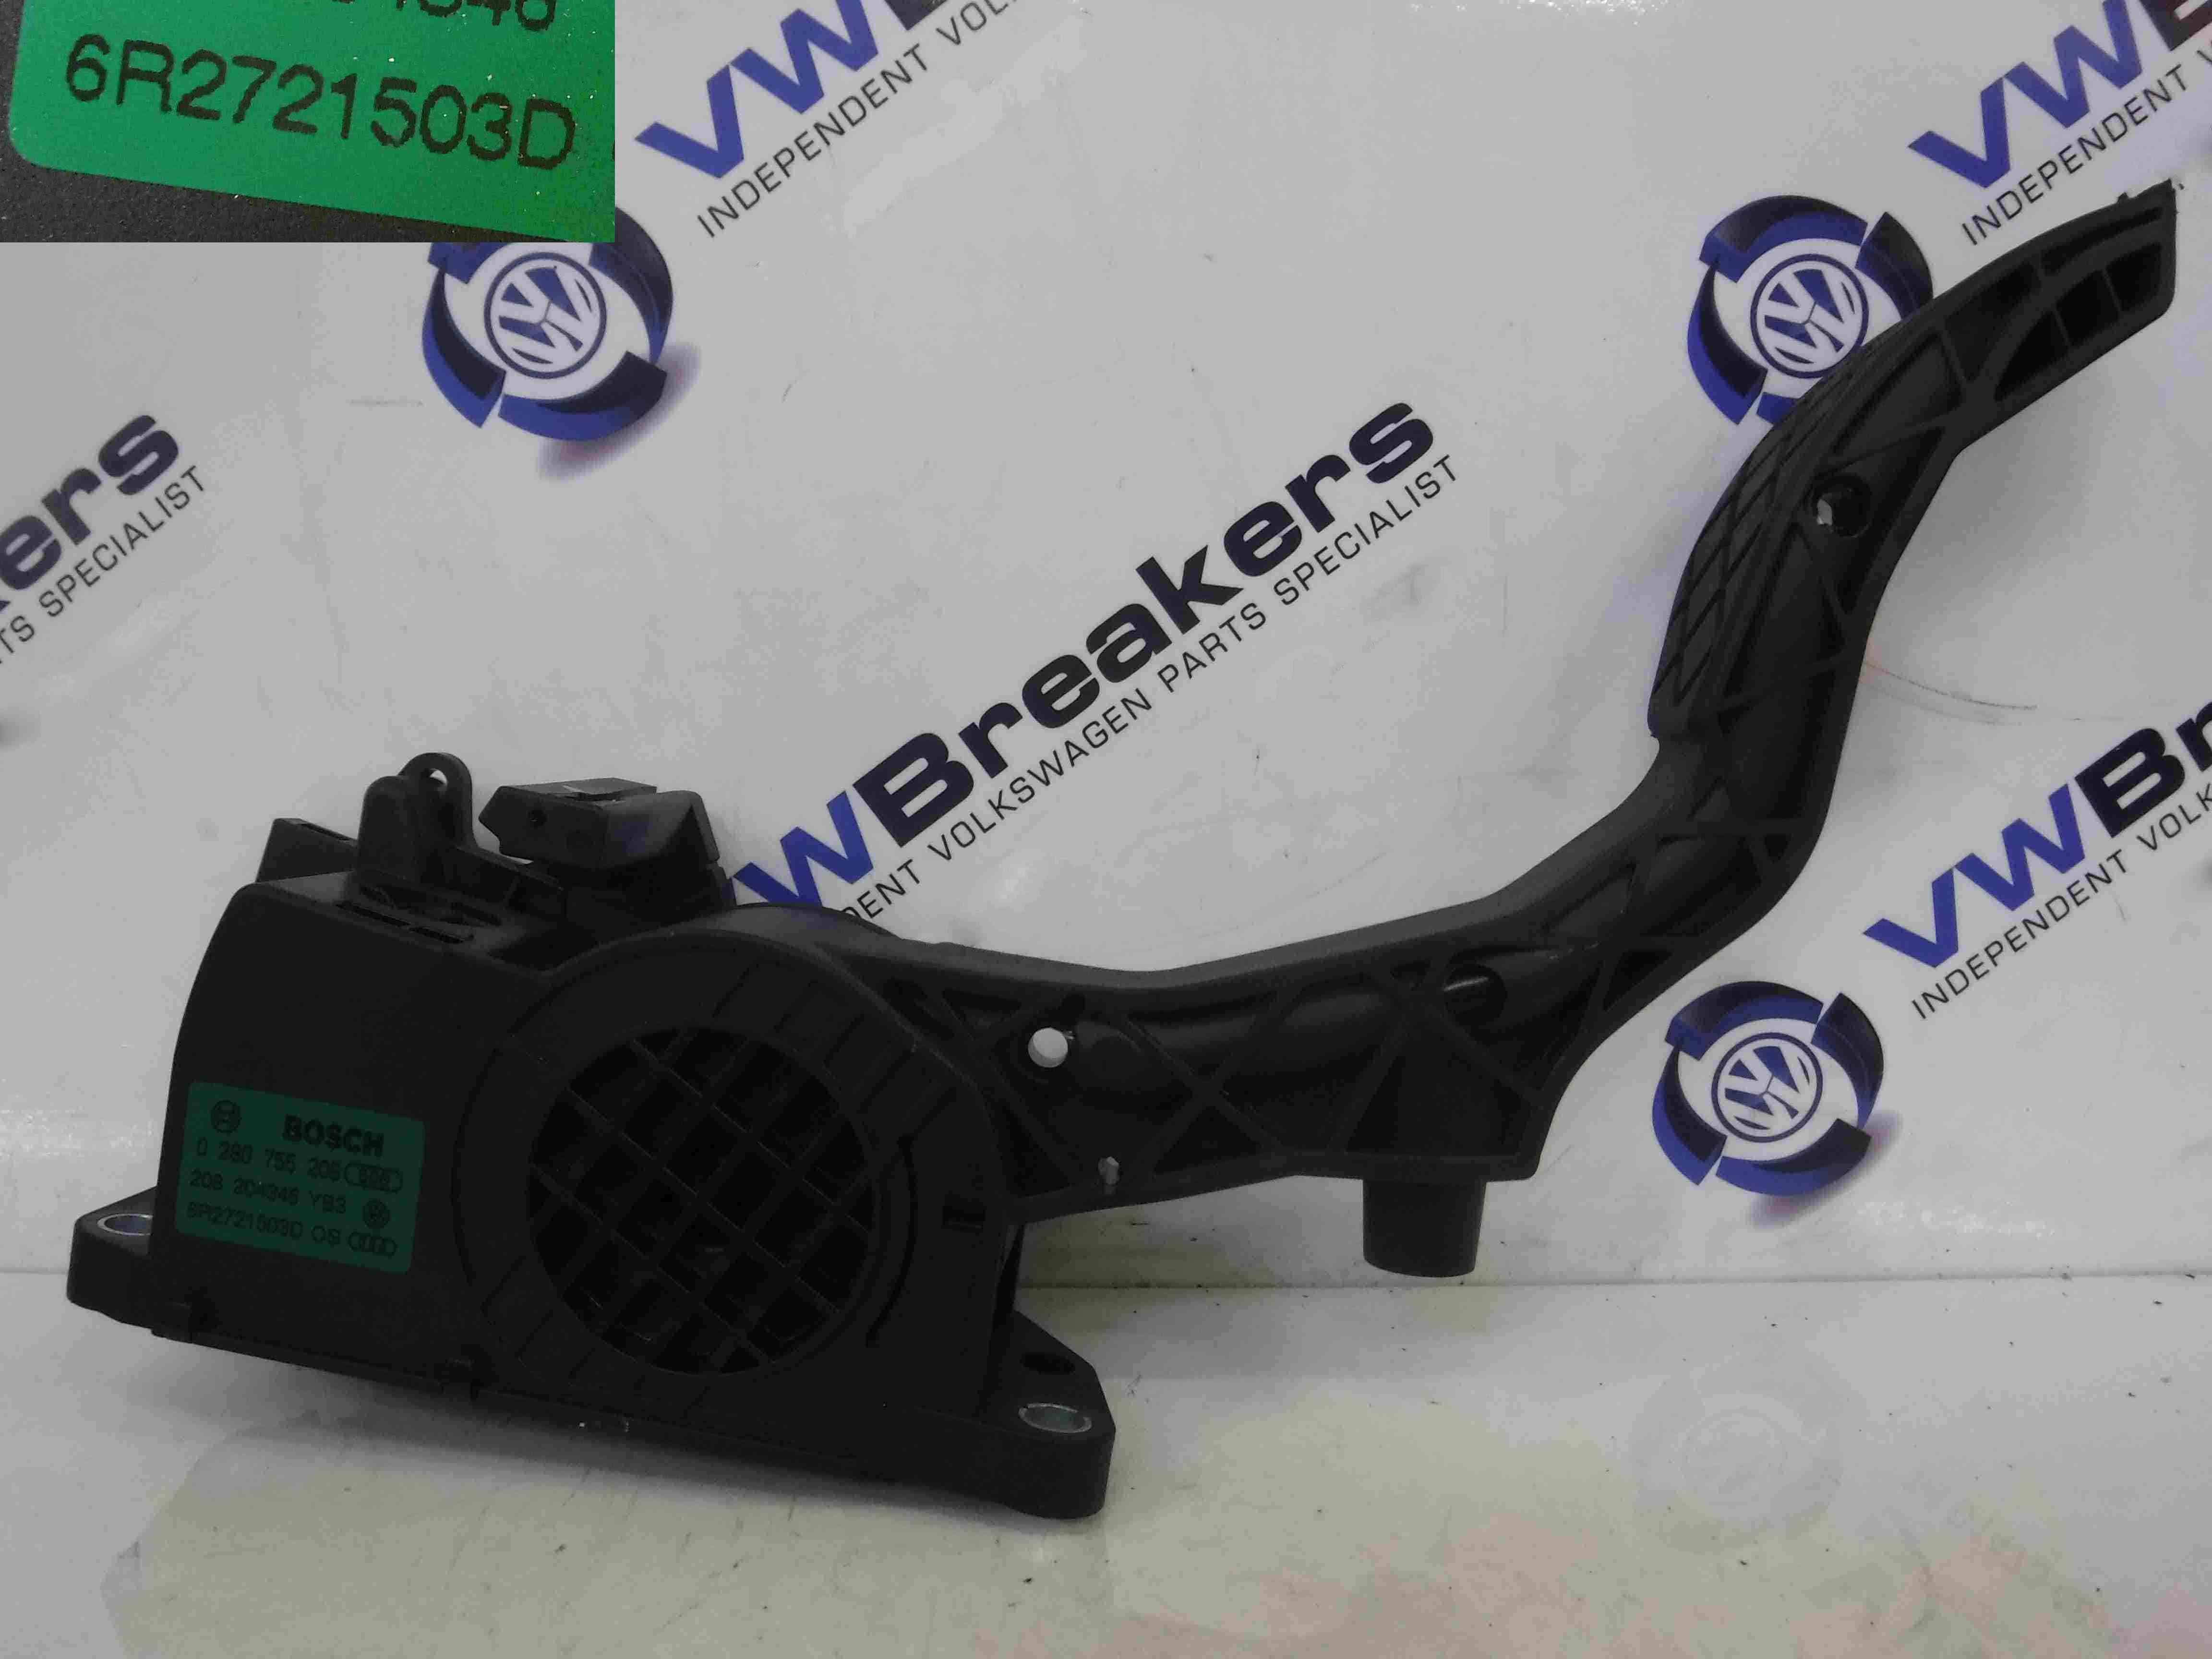 Volkswagen Polo 6R 2009-2015 Throttle Pedal Accelerator Electric 6R2721503D